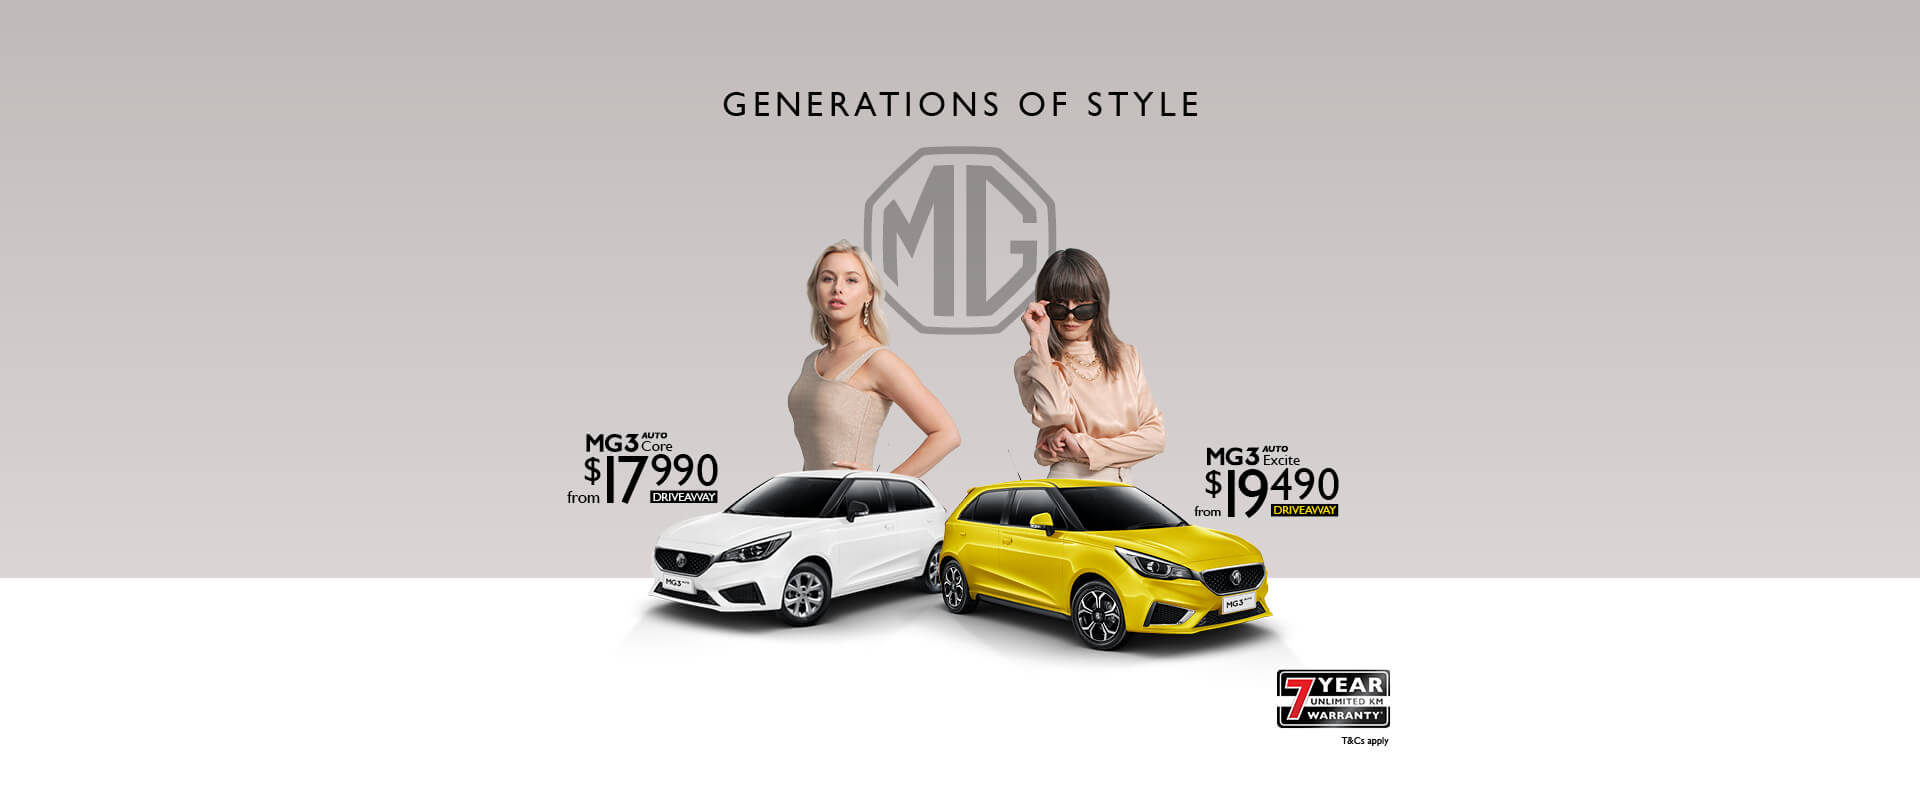 MG3 Generations of Style